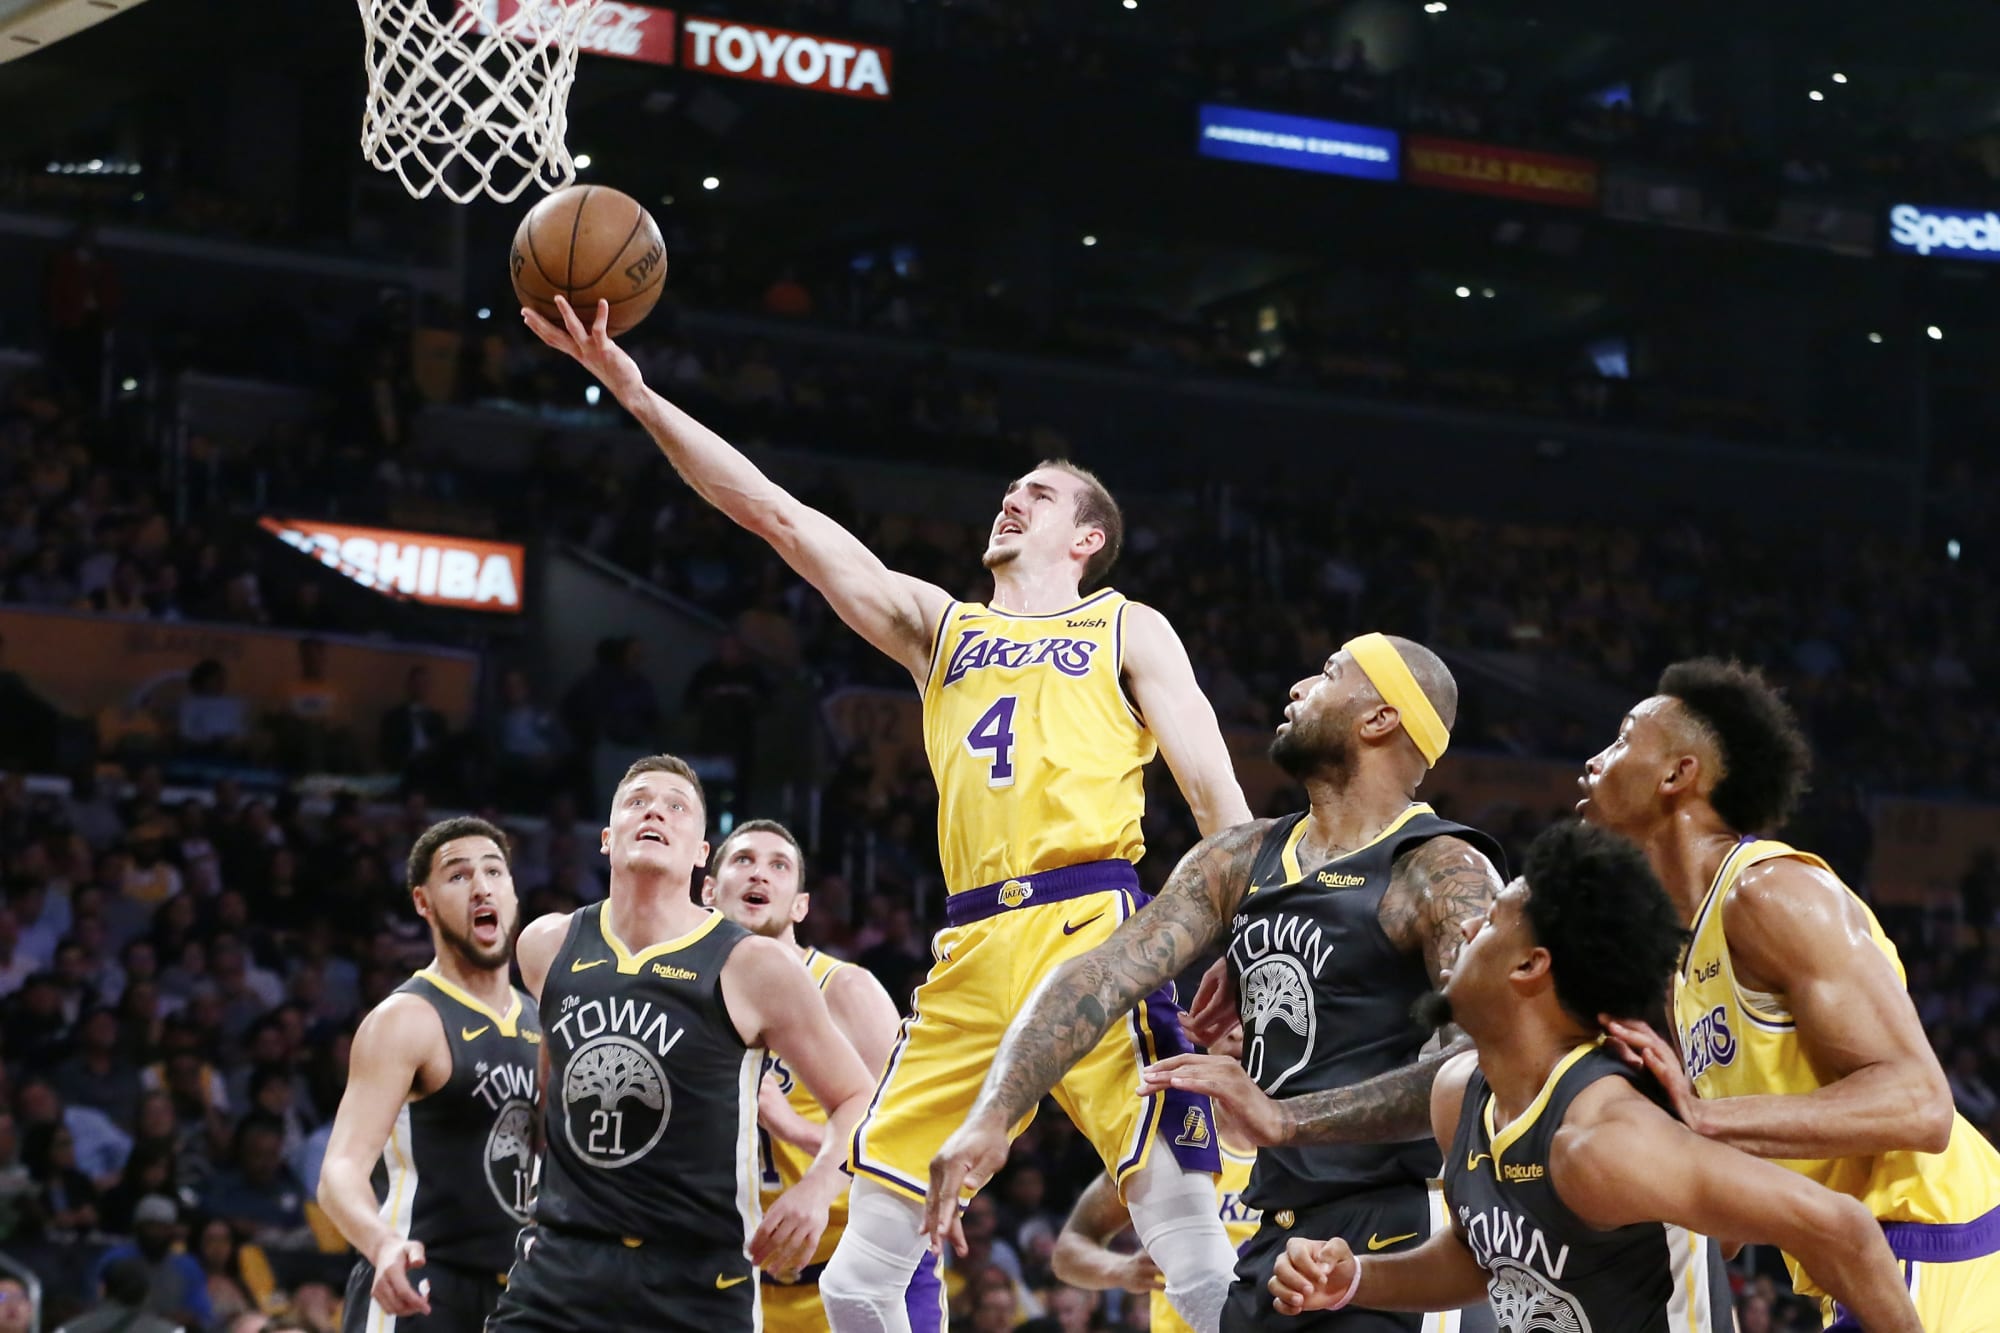 NBA analyst picks Alex Caruso a favorite for Golden State if